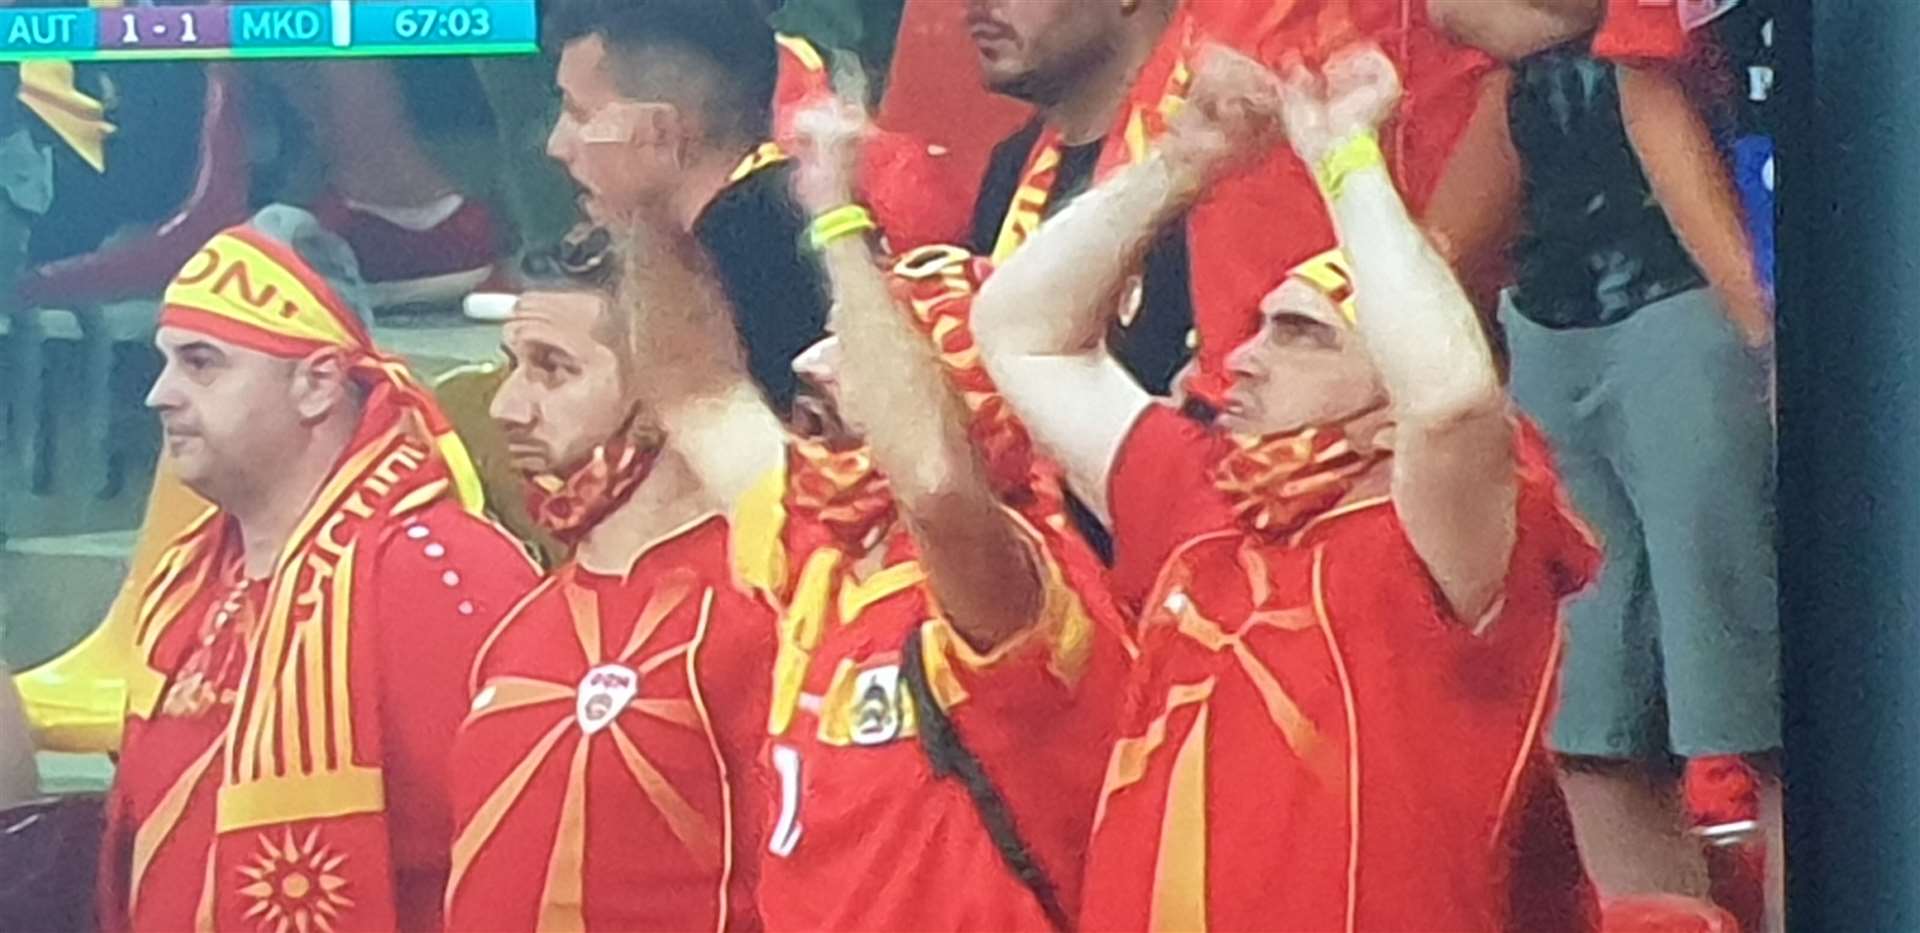 The Macedonian fans were a colourful bunch.